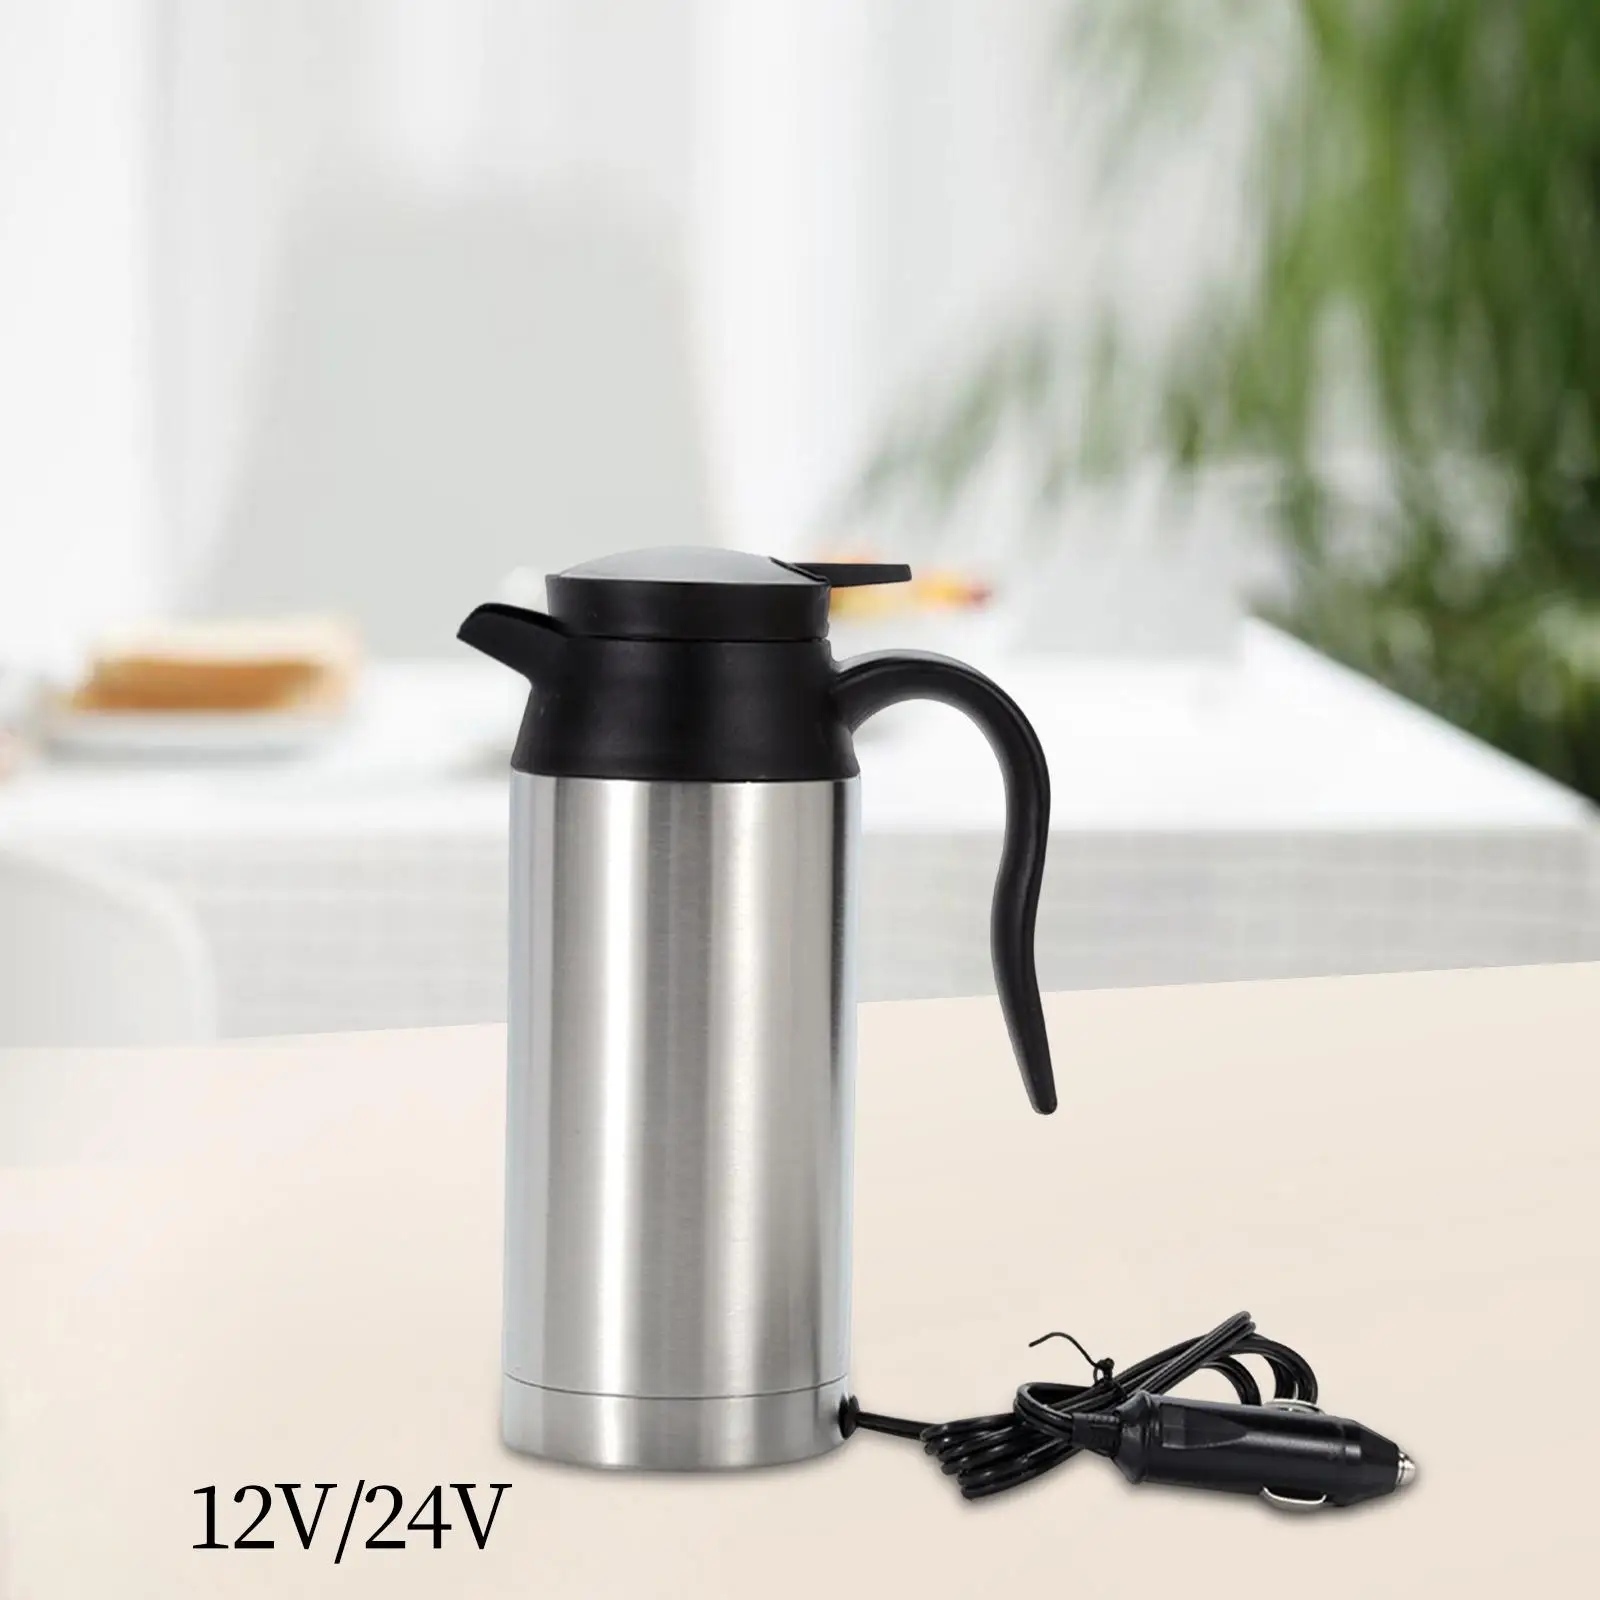 750ml Stainless Steel Automotive Car Heating Kettle Water Bottle Durable for Hot Water, Coffee, Tea, Beverage Coffee Mug Pot